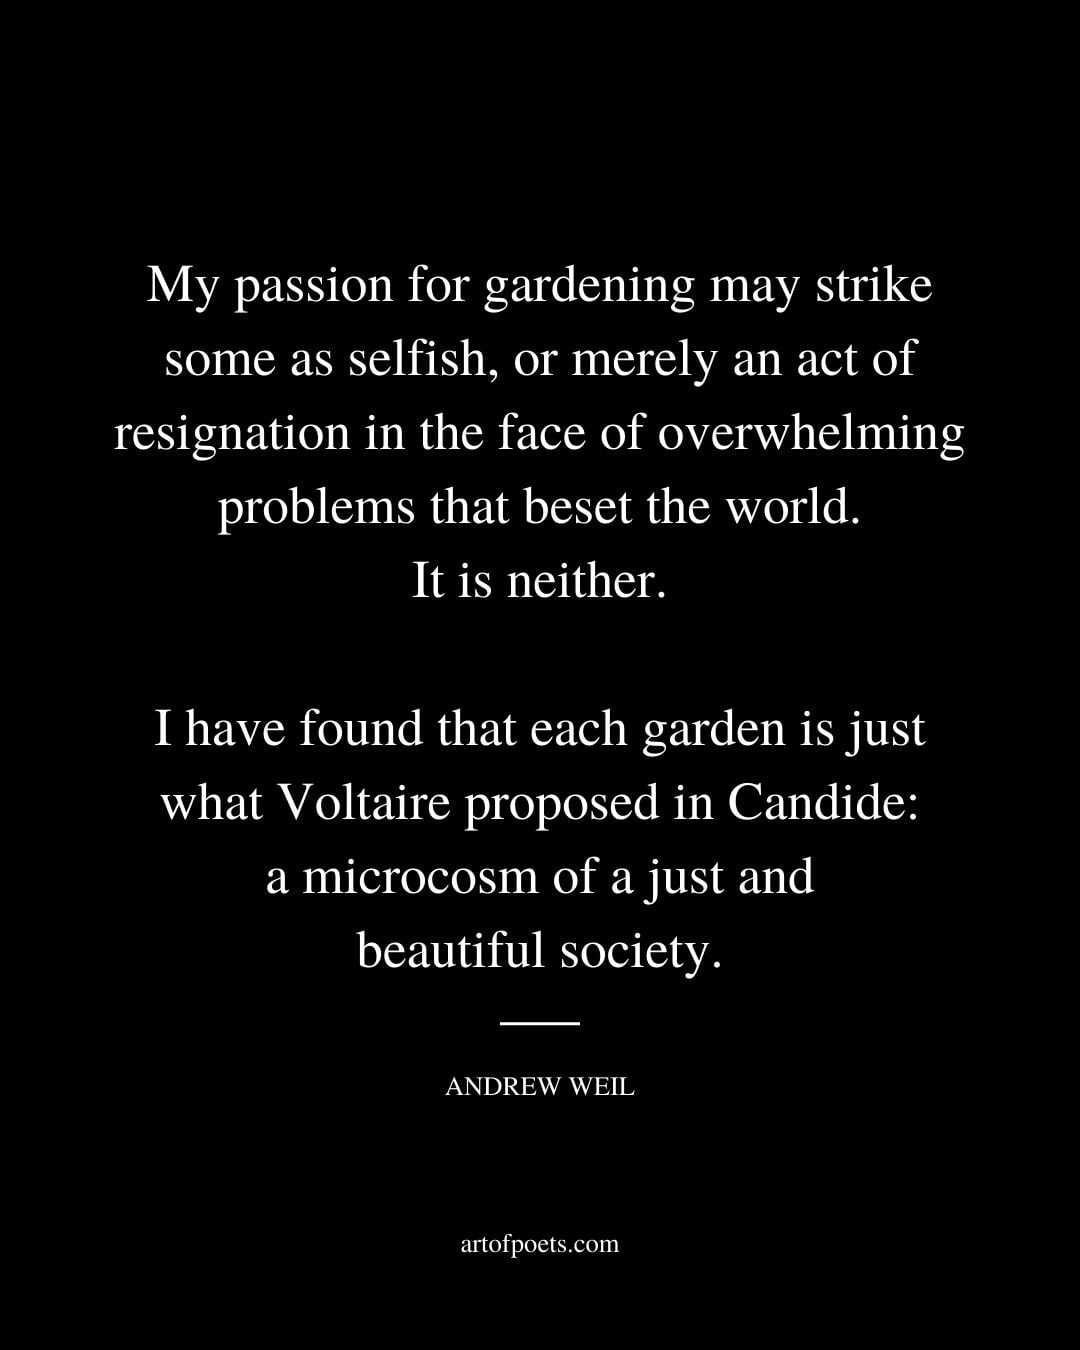 My passion for gardening may strike some as selfish or merely an act of resignation in the face of overwhelming problem